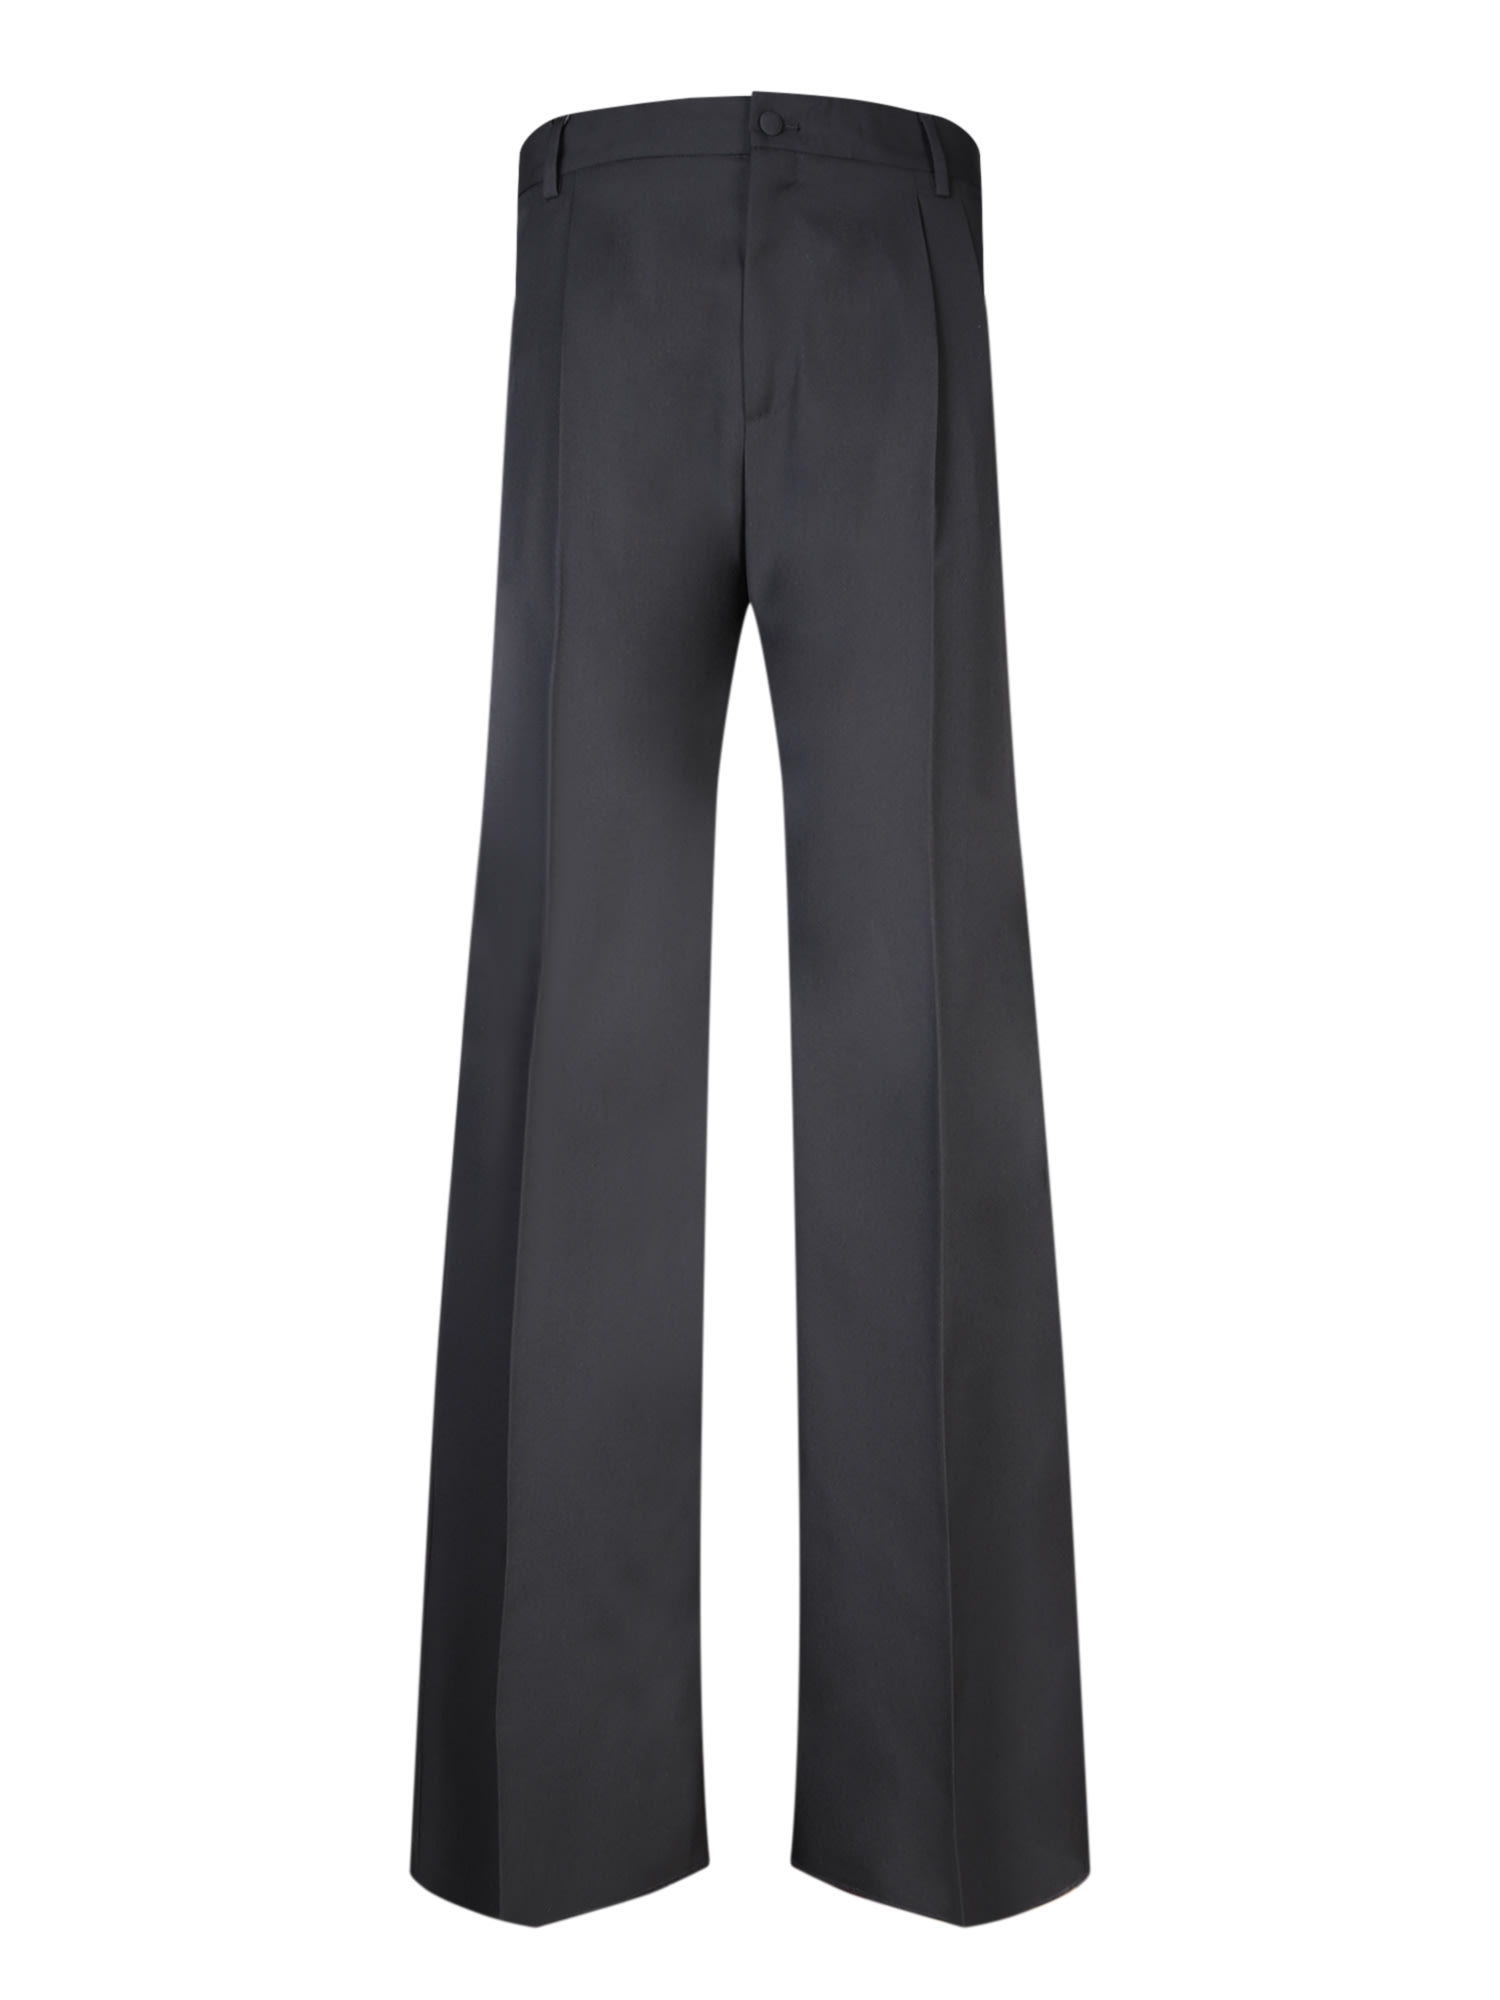 DOLCE & GABBANA WIDE FIT BLACK TROUSERS